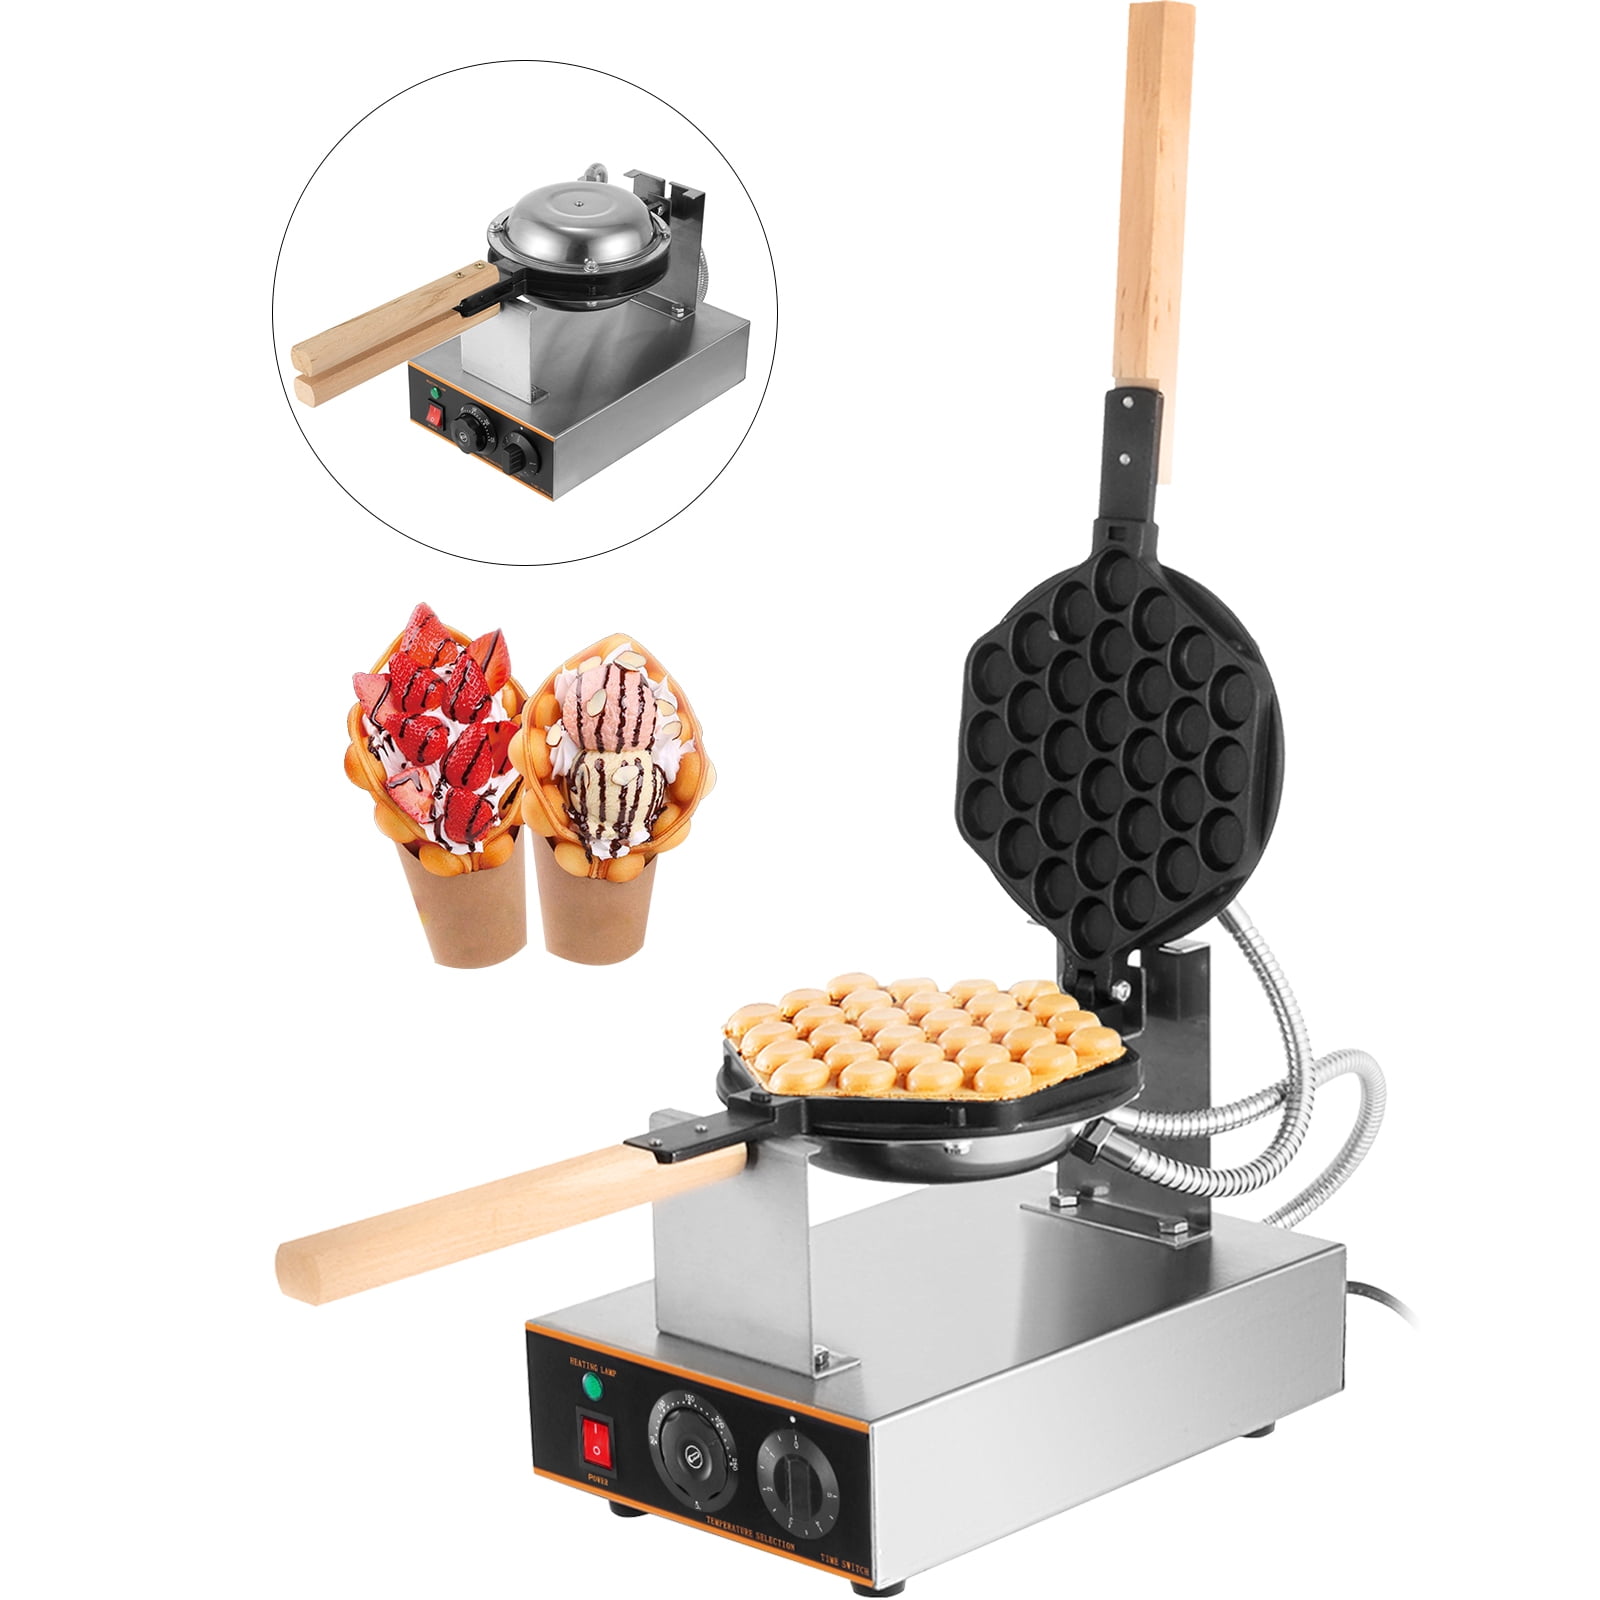 VEVOR 110V Bubble Waffle Maker 1400W Electric Nonstick Hong Kong Egg Waffler Iron Professional Rotated Eggettes Waffle Baker Ready in Under 5 Minutes